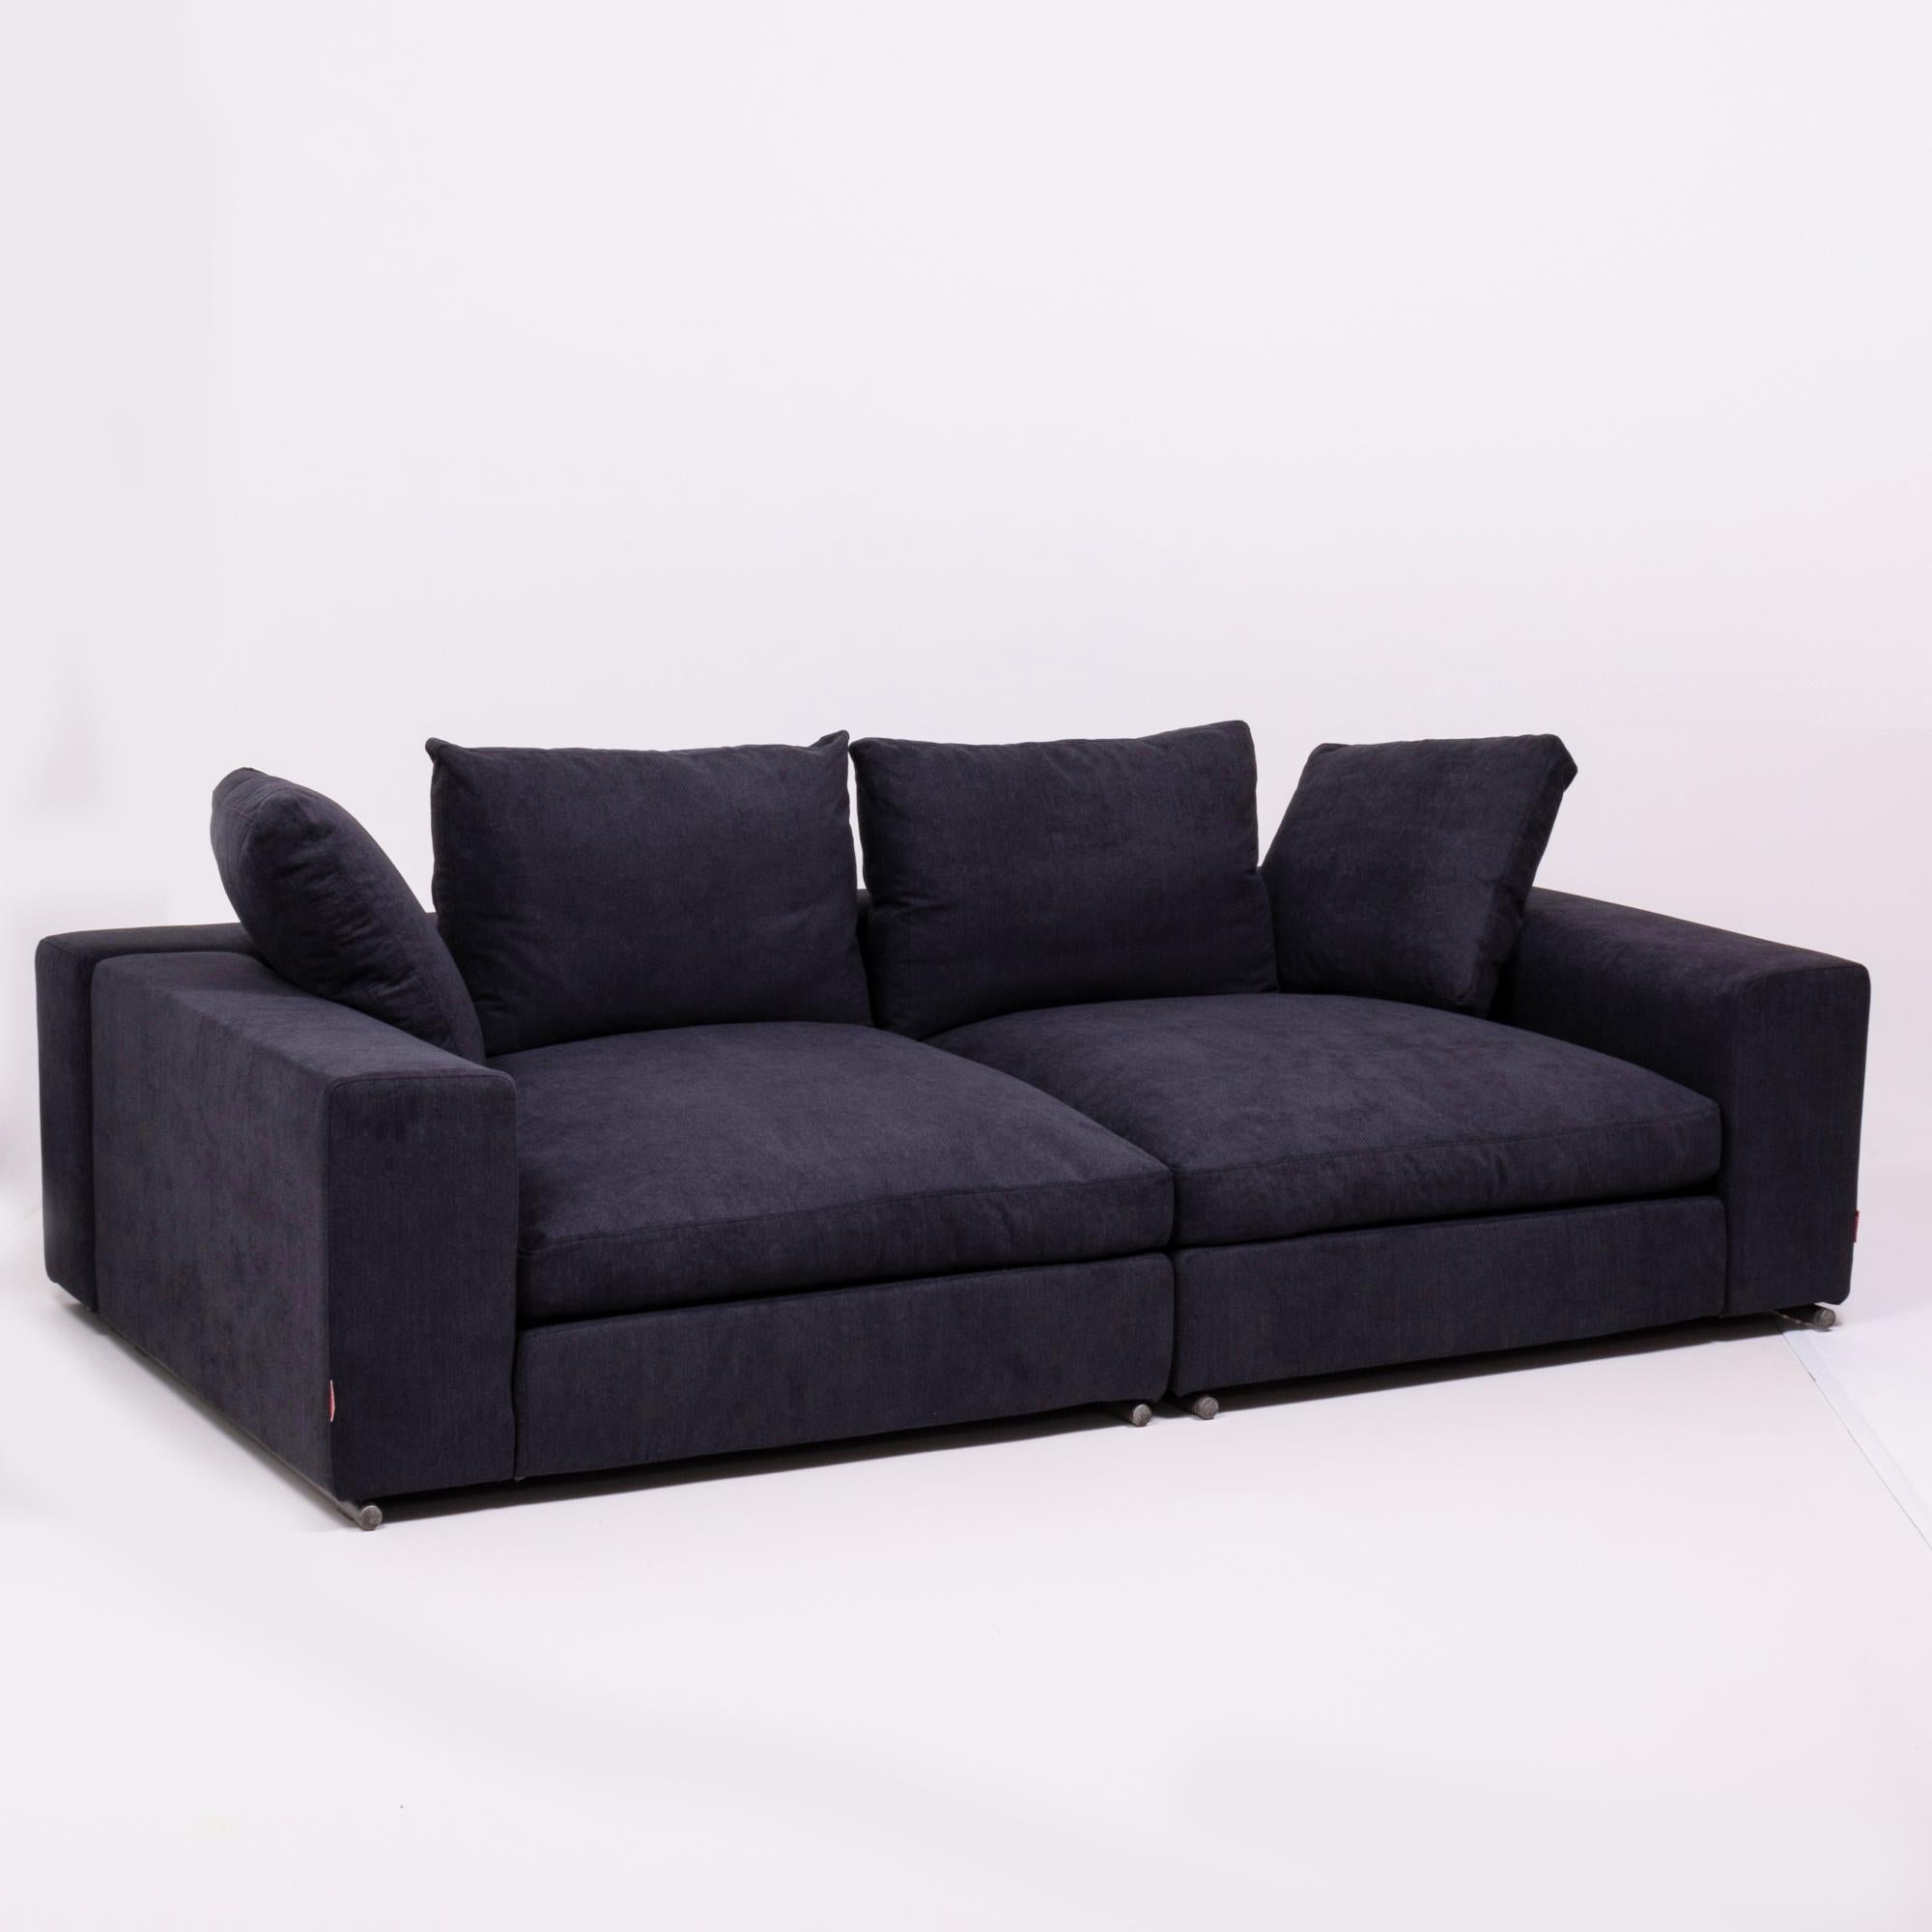 Exuding style and comfort, this sectional sofa made by Flexform has been newly reupholstered in a slate grey Linara fabric.

Comprising of two separate units, the sofa has a thick block-like frame and tubular metal feet.

The two seat cushions,